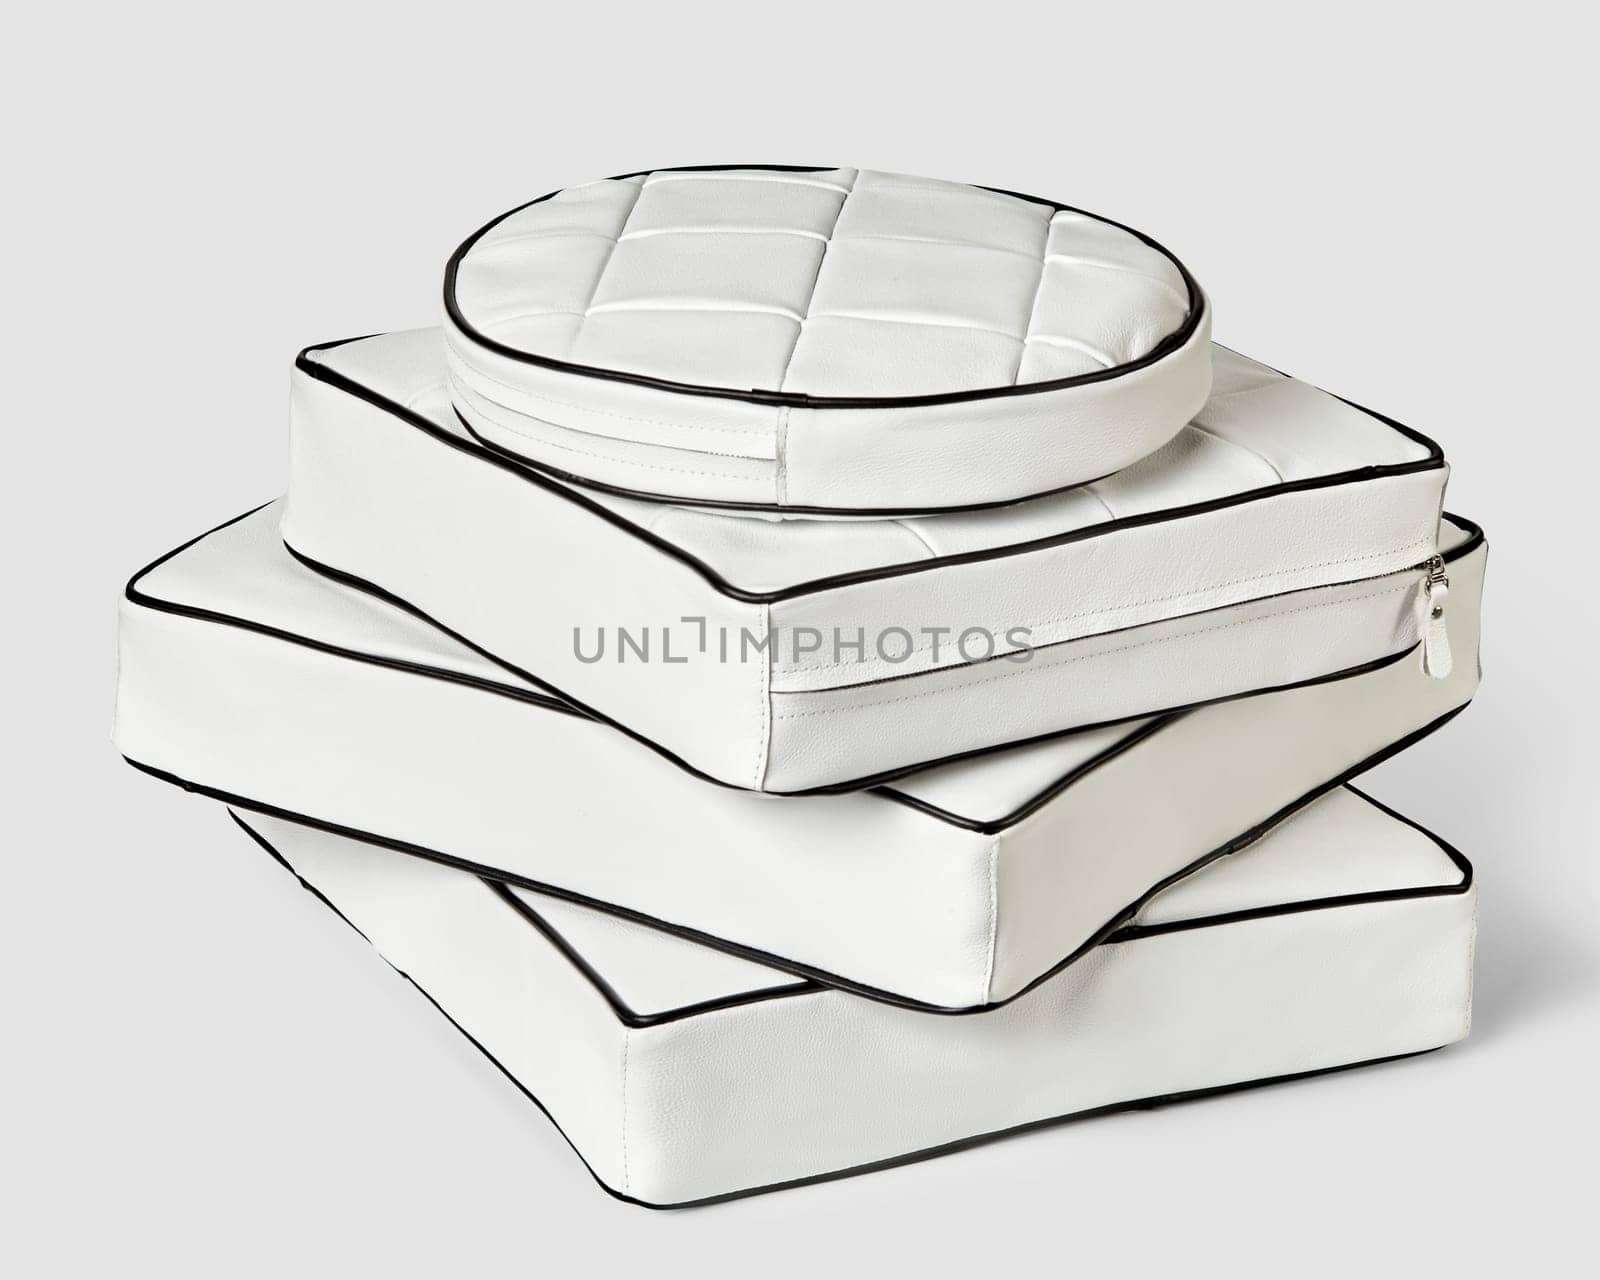 Stack of stylish minimalist square and round seat cushions of different sizes in white genuine leather decorated with black trim. Handmade interior accessories